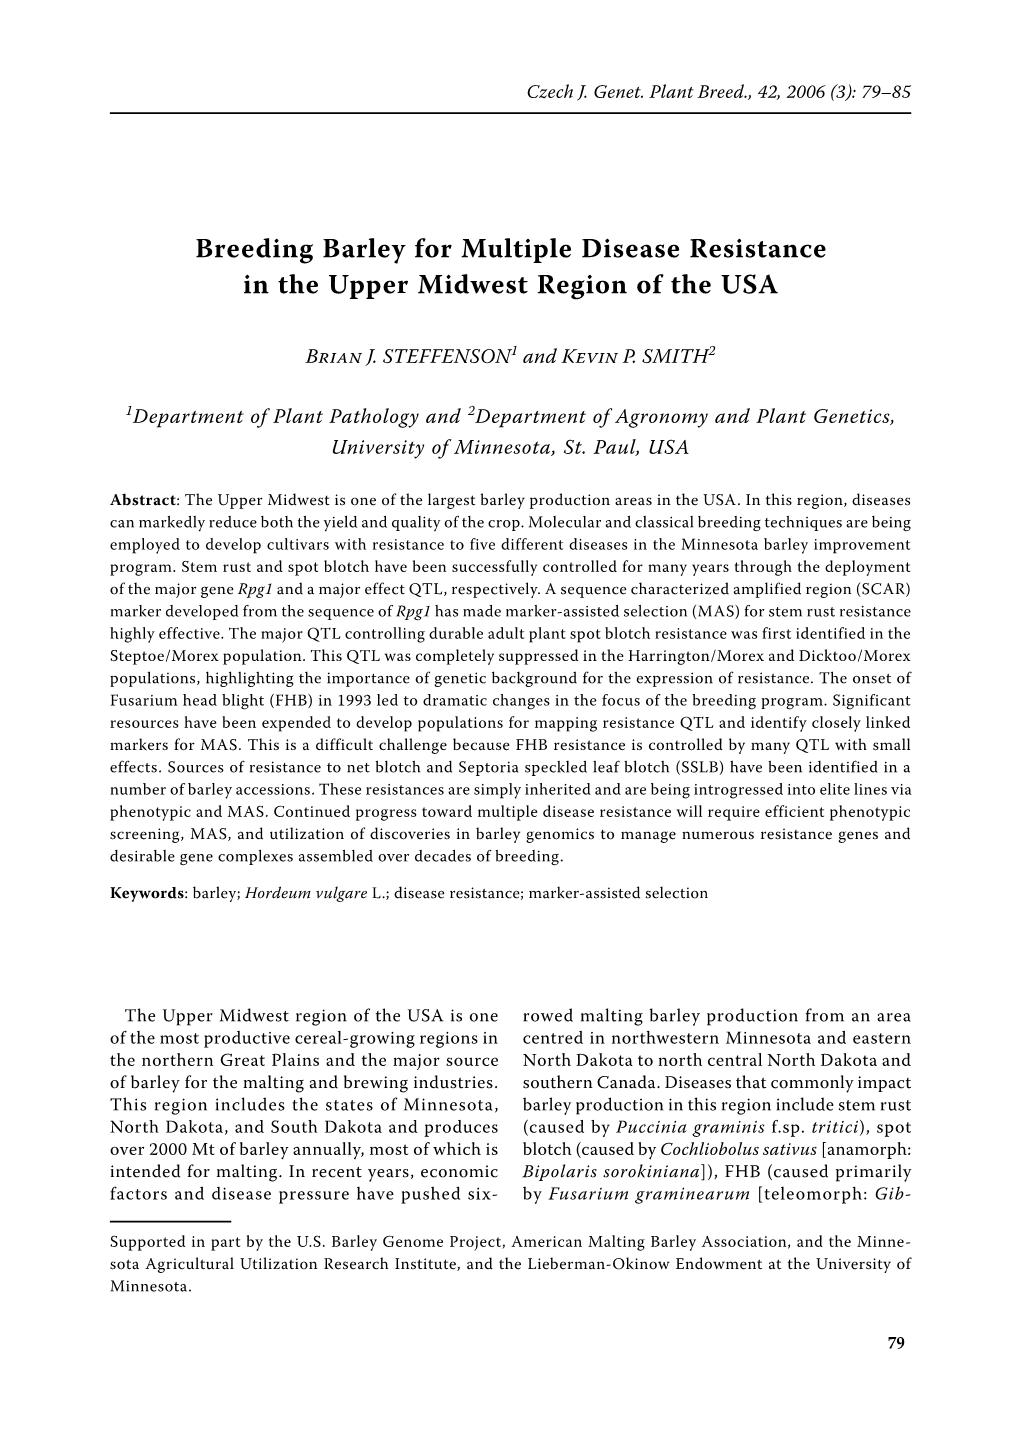 Breeding Barley for Multiple Disease Resistance in the Upper Midwest Region of the USA